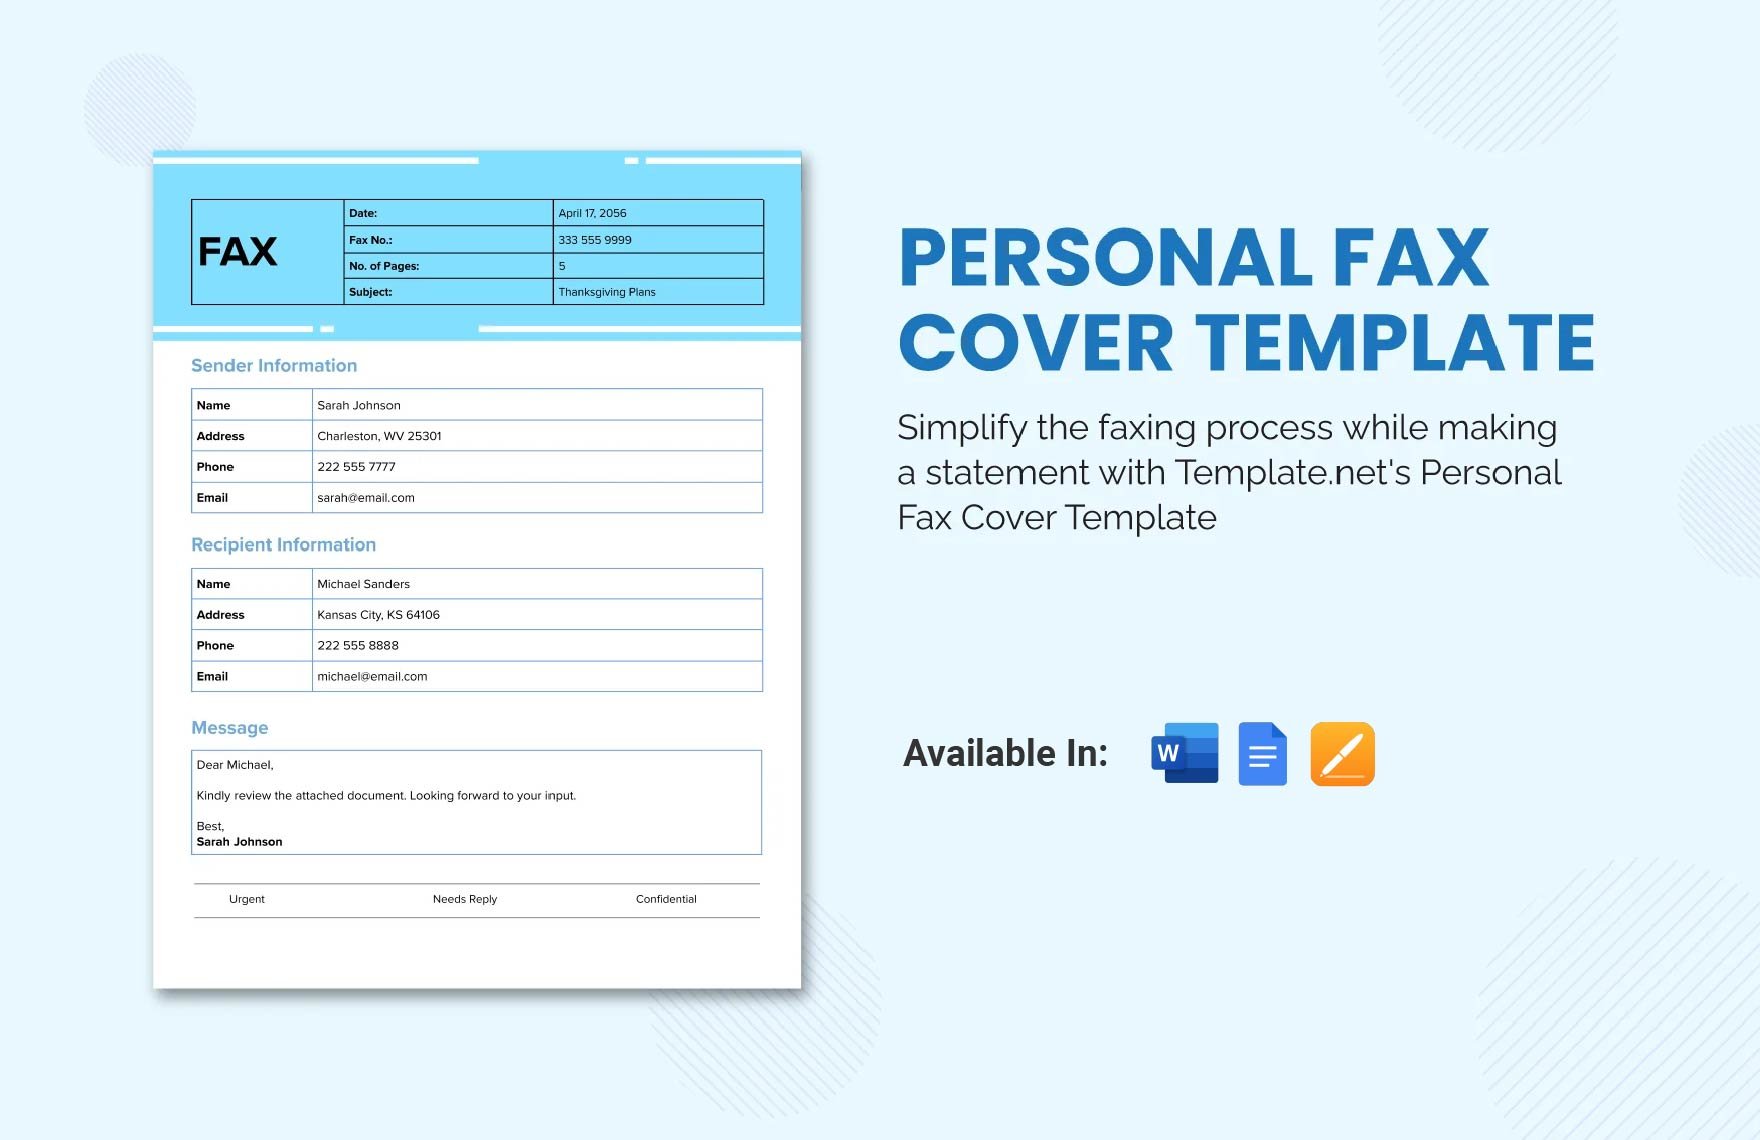 Personal Fax Cover Template